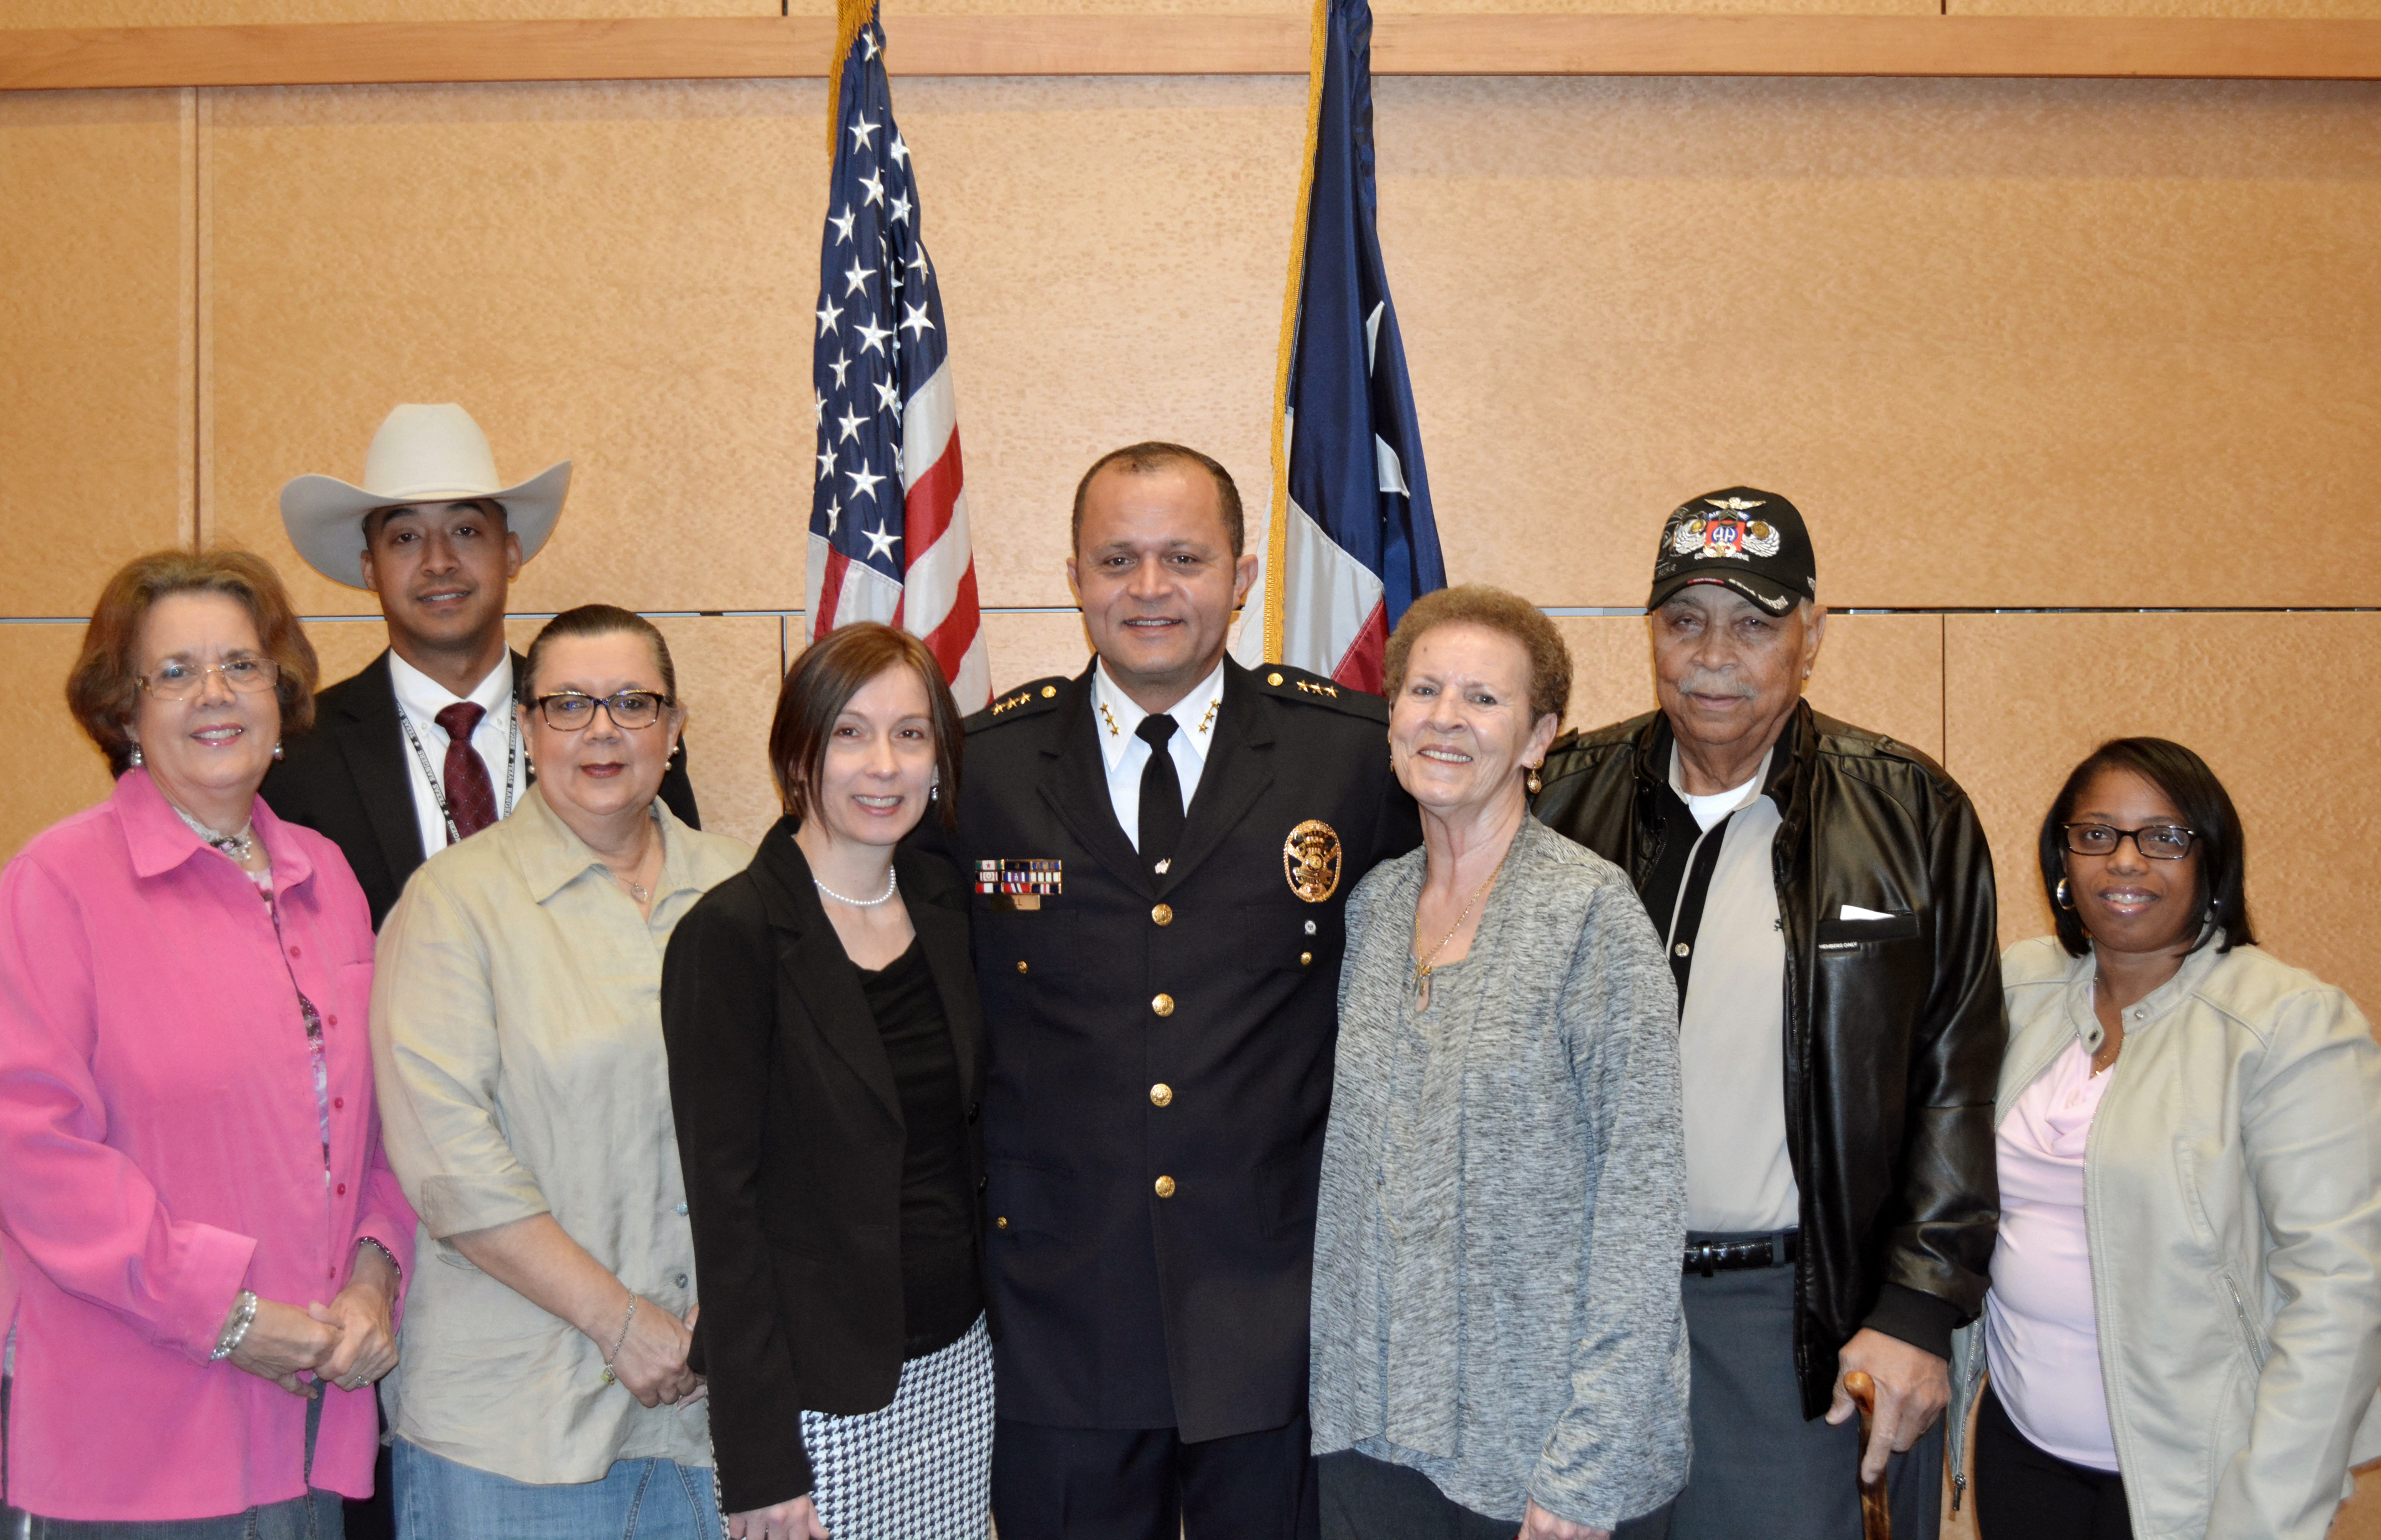 Photo: Hill, center, was joined in the celebration by his family (from left) his aunts, Mary Knox and Francine Sparrow; his cousin, Texas Ranger James Wilkins; his wife, Eva Lanczos Hill; his parents, Clarence and Edna Hill and his sister, Catherine Hill. Photo courtesy of Jim Townsend.